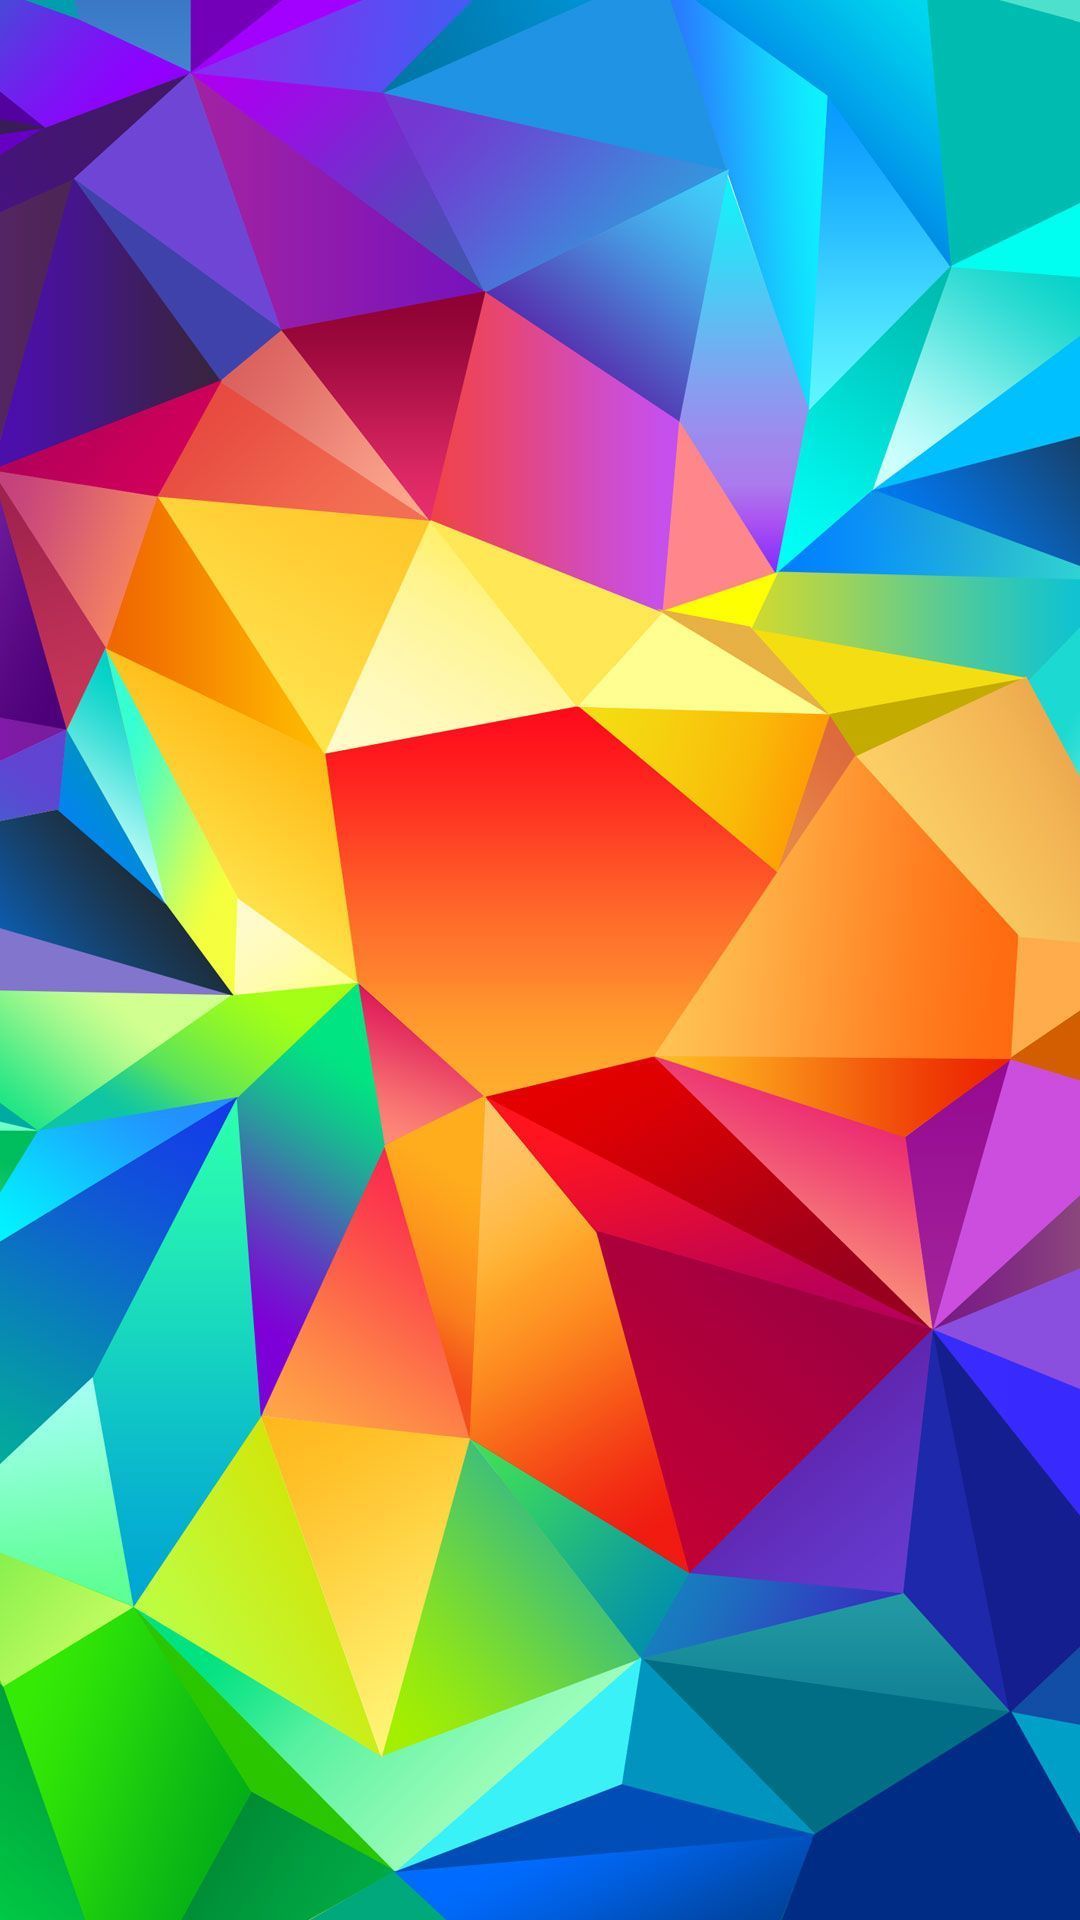 Colorful Polygon HD Wallpaper (Desktop Background / Android / iPhone) (1080p, 4k) (1080x1920) (2021)